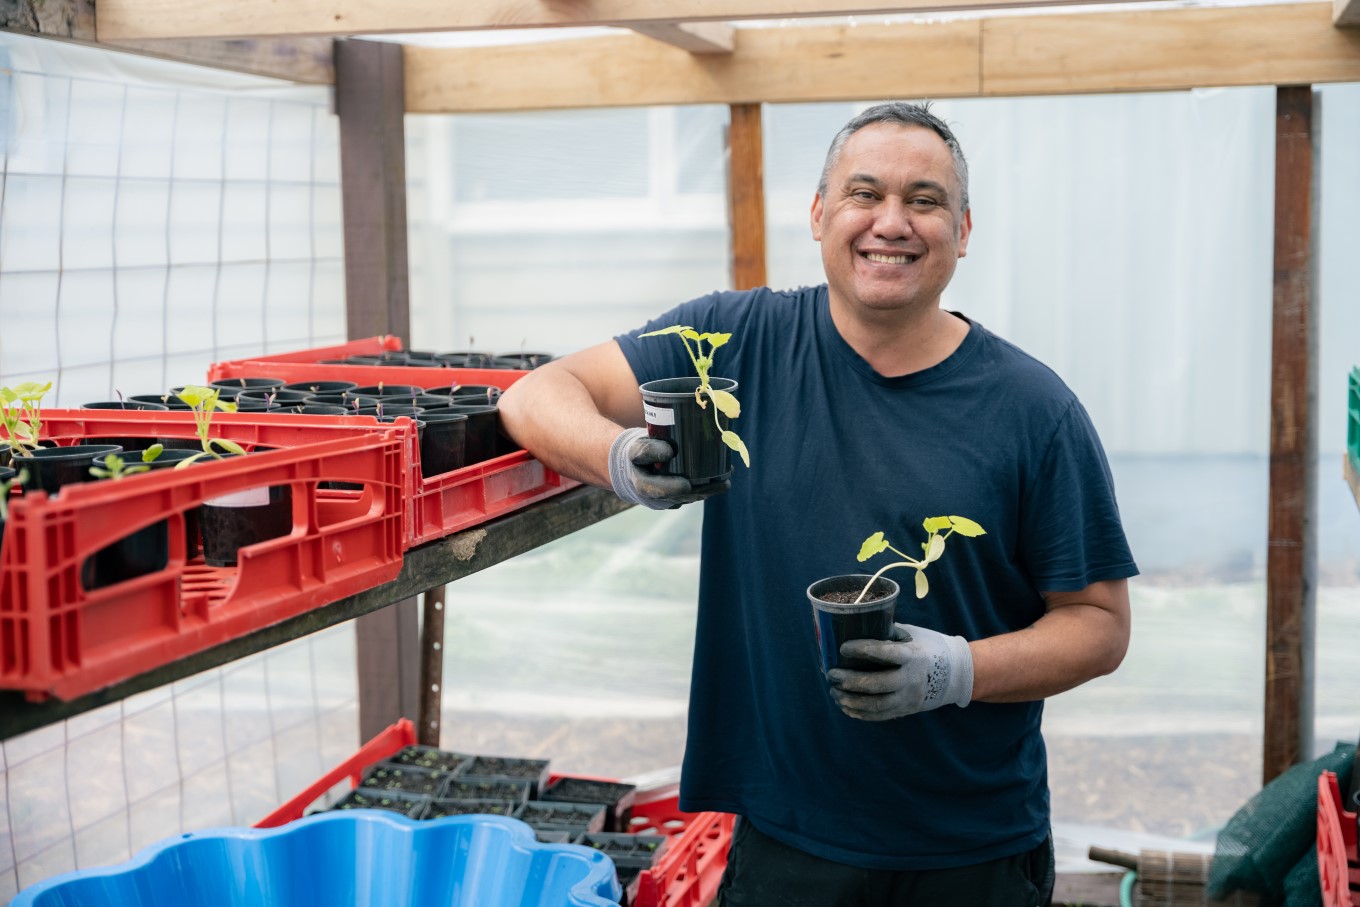 Join a community garden and learn how to grow your own food from experts like Dalton Neho from Awhi Mai Te Atatū: Growing as a Community.